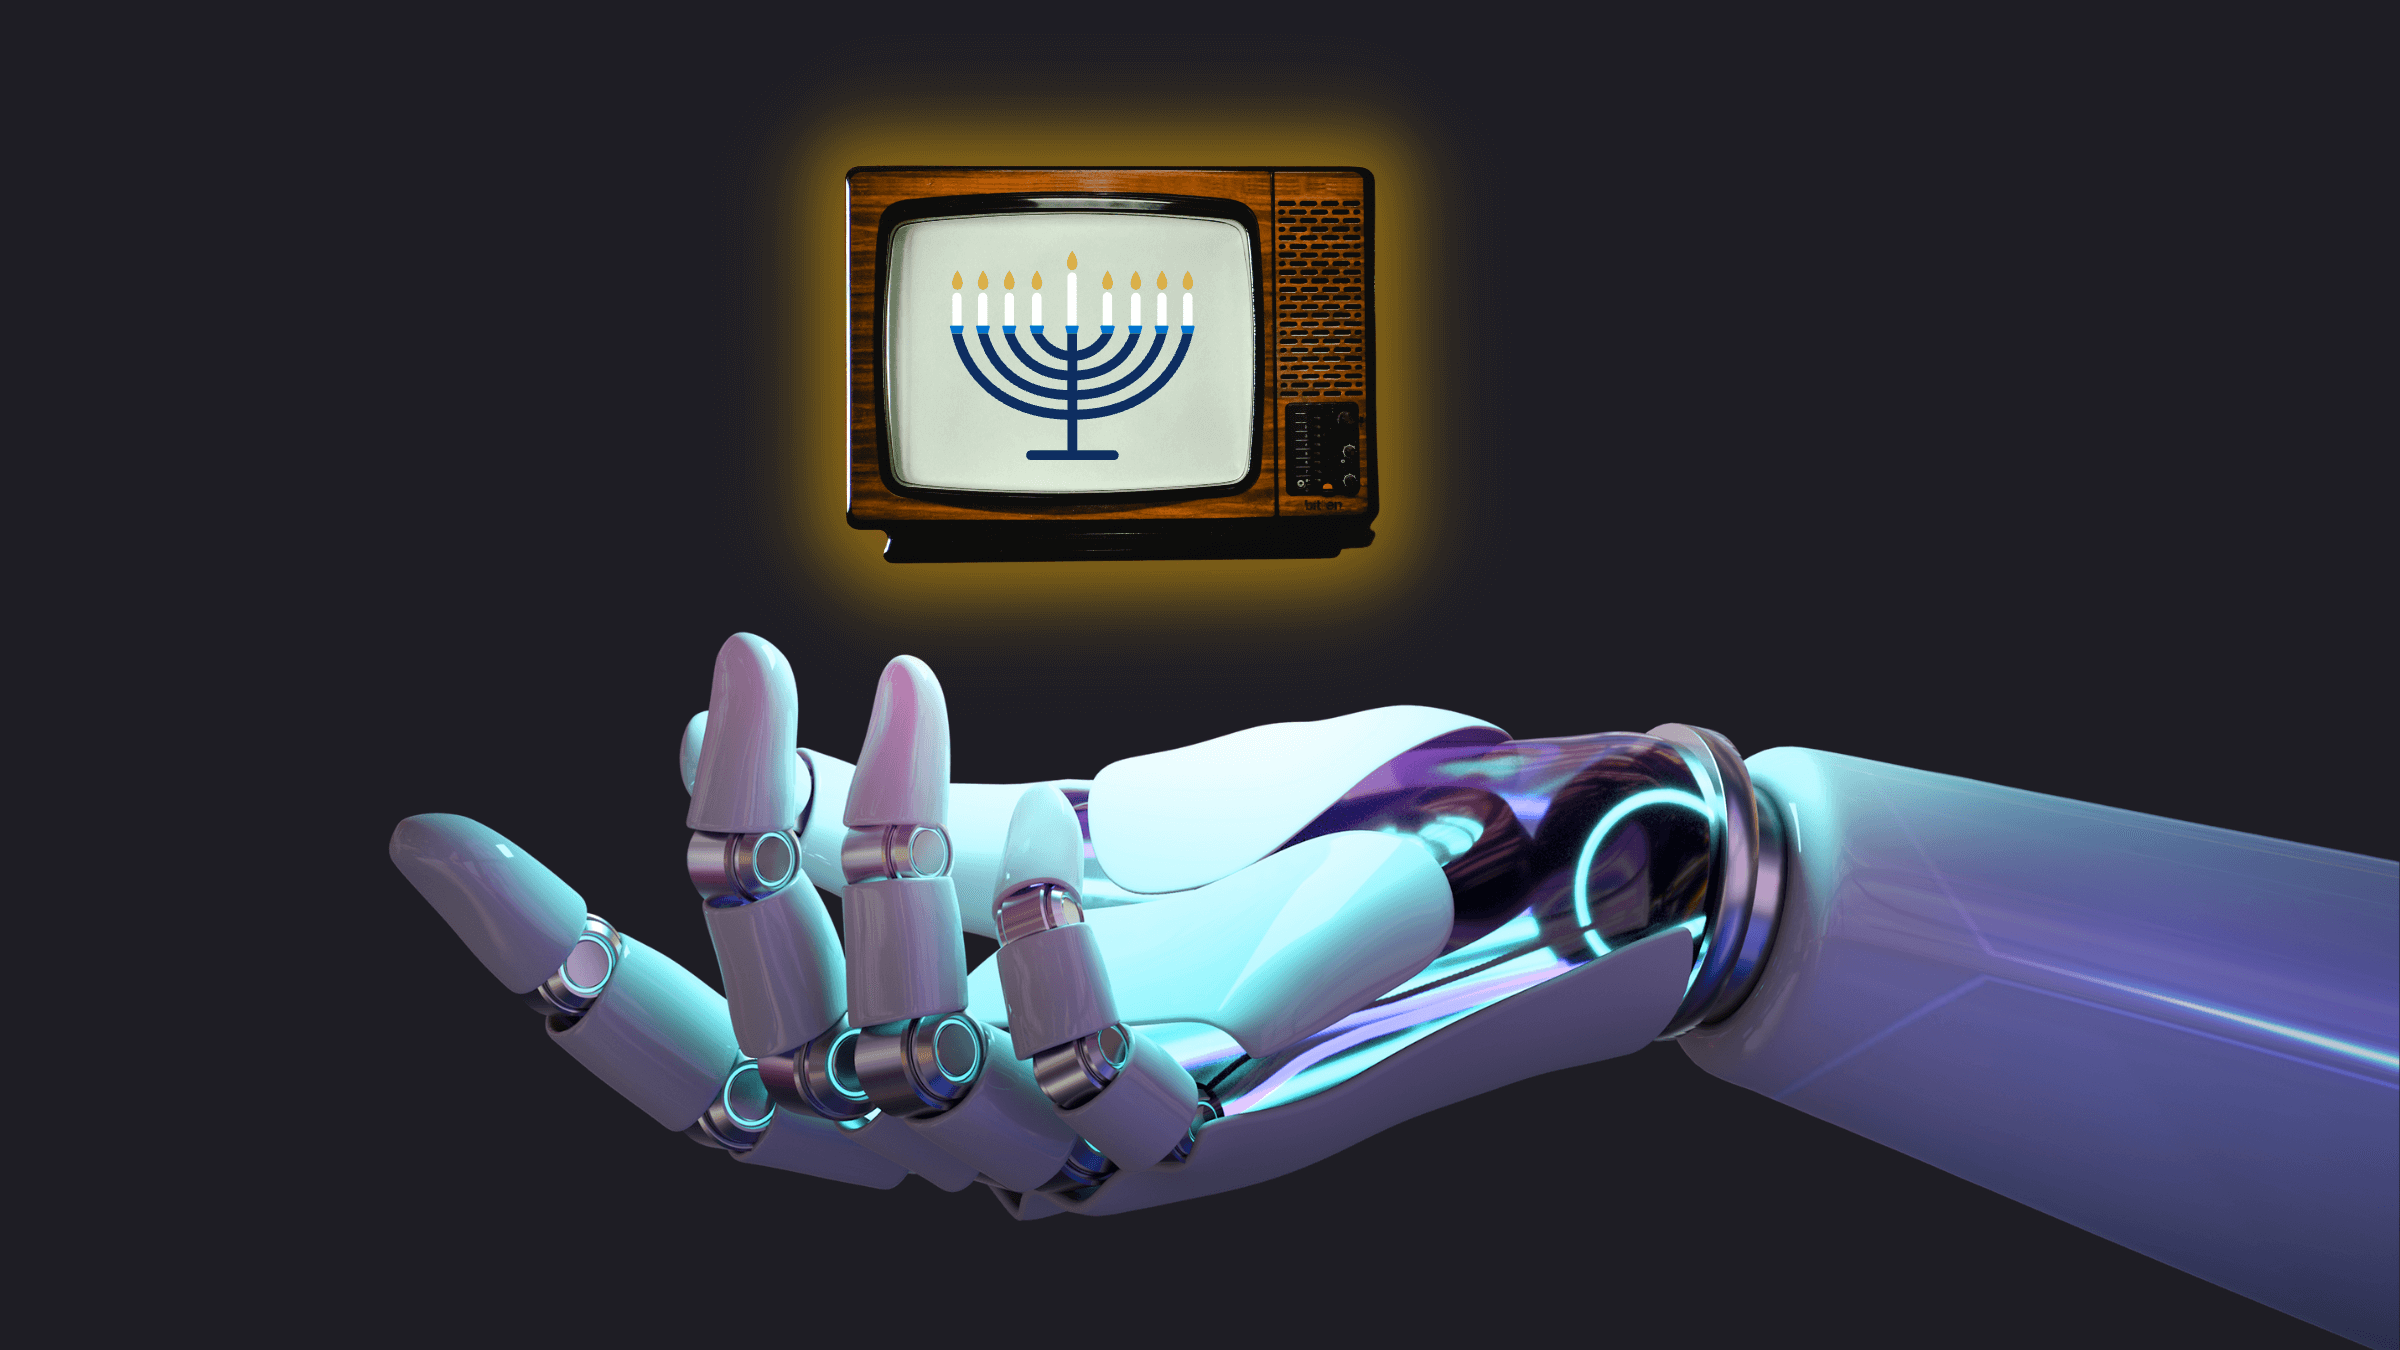 Robots can now create Hanukkah movie plots in just seconds.